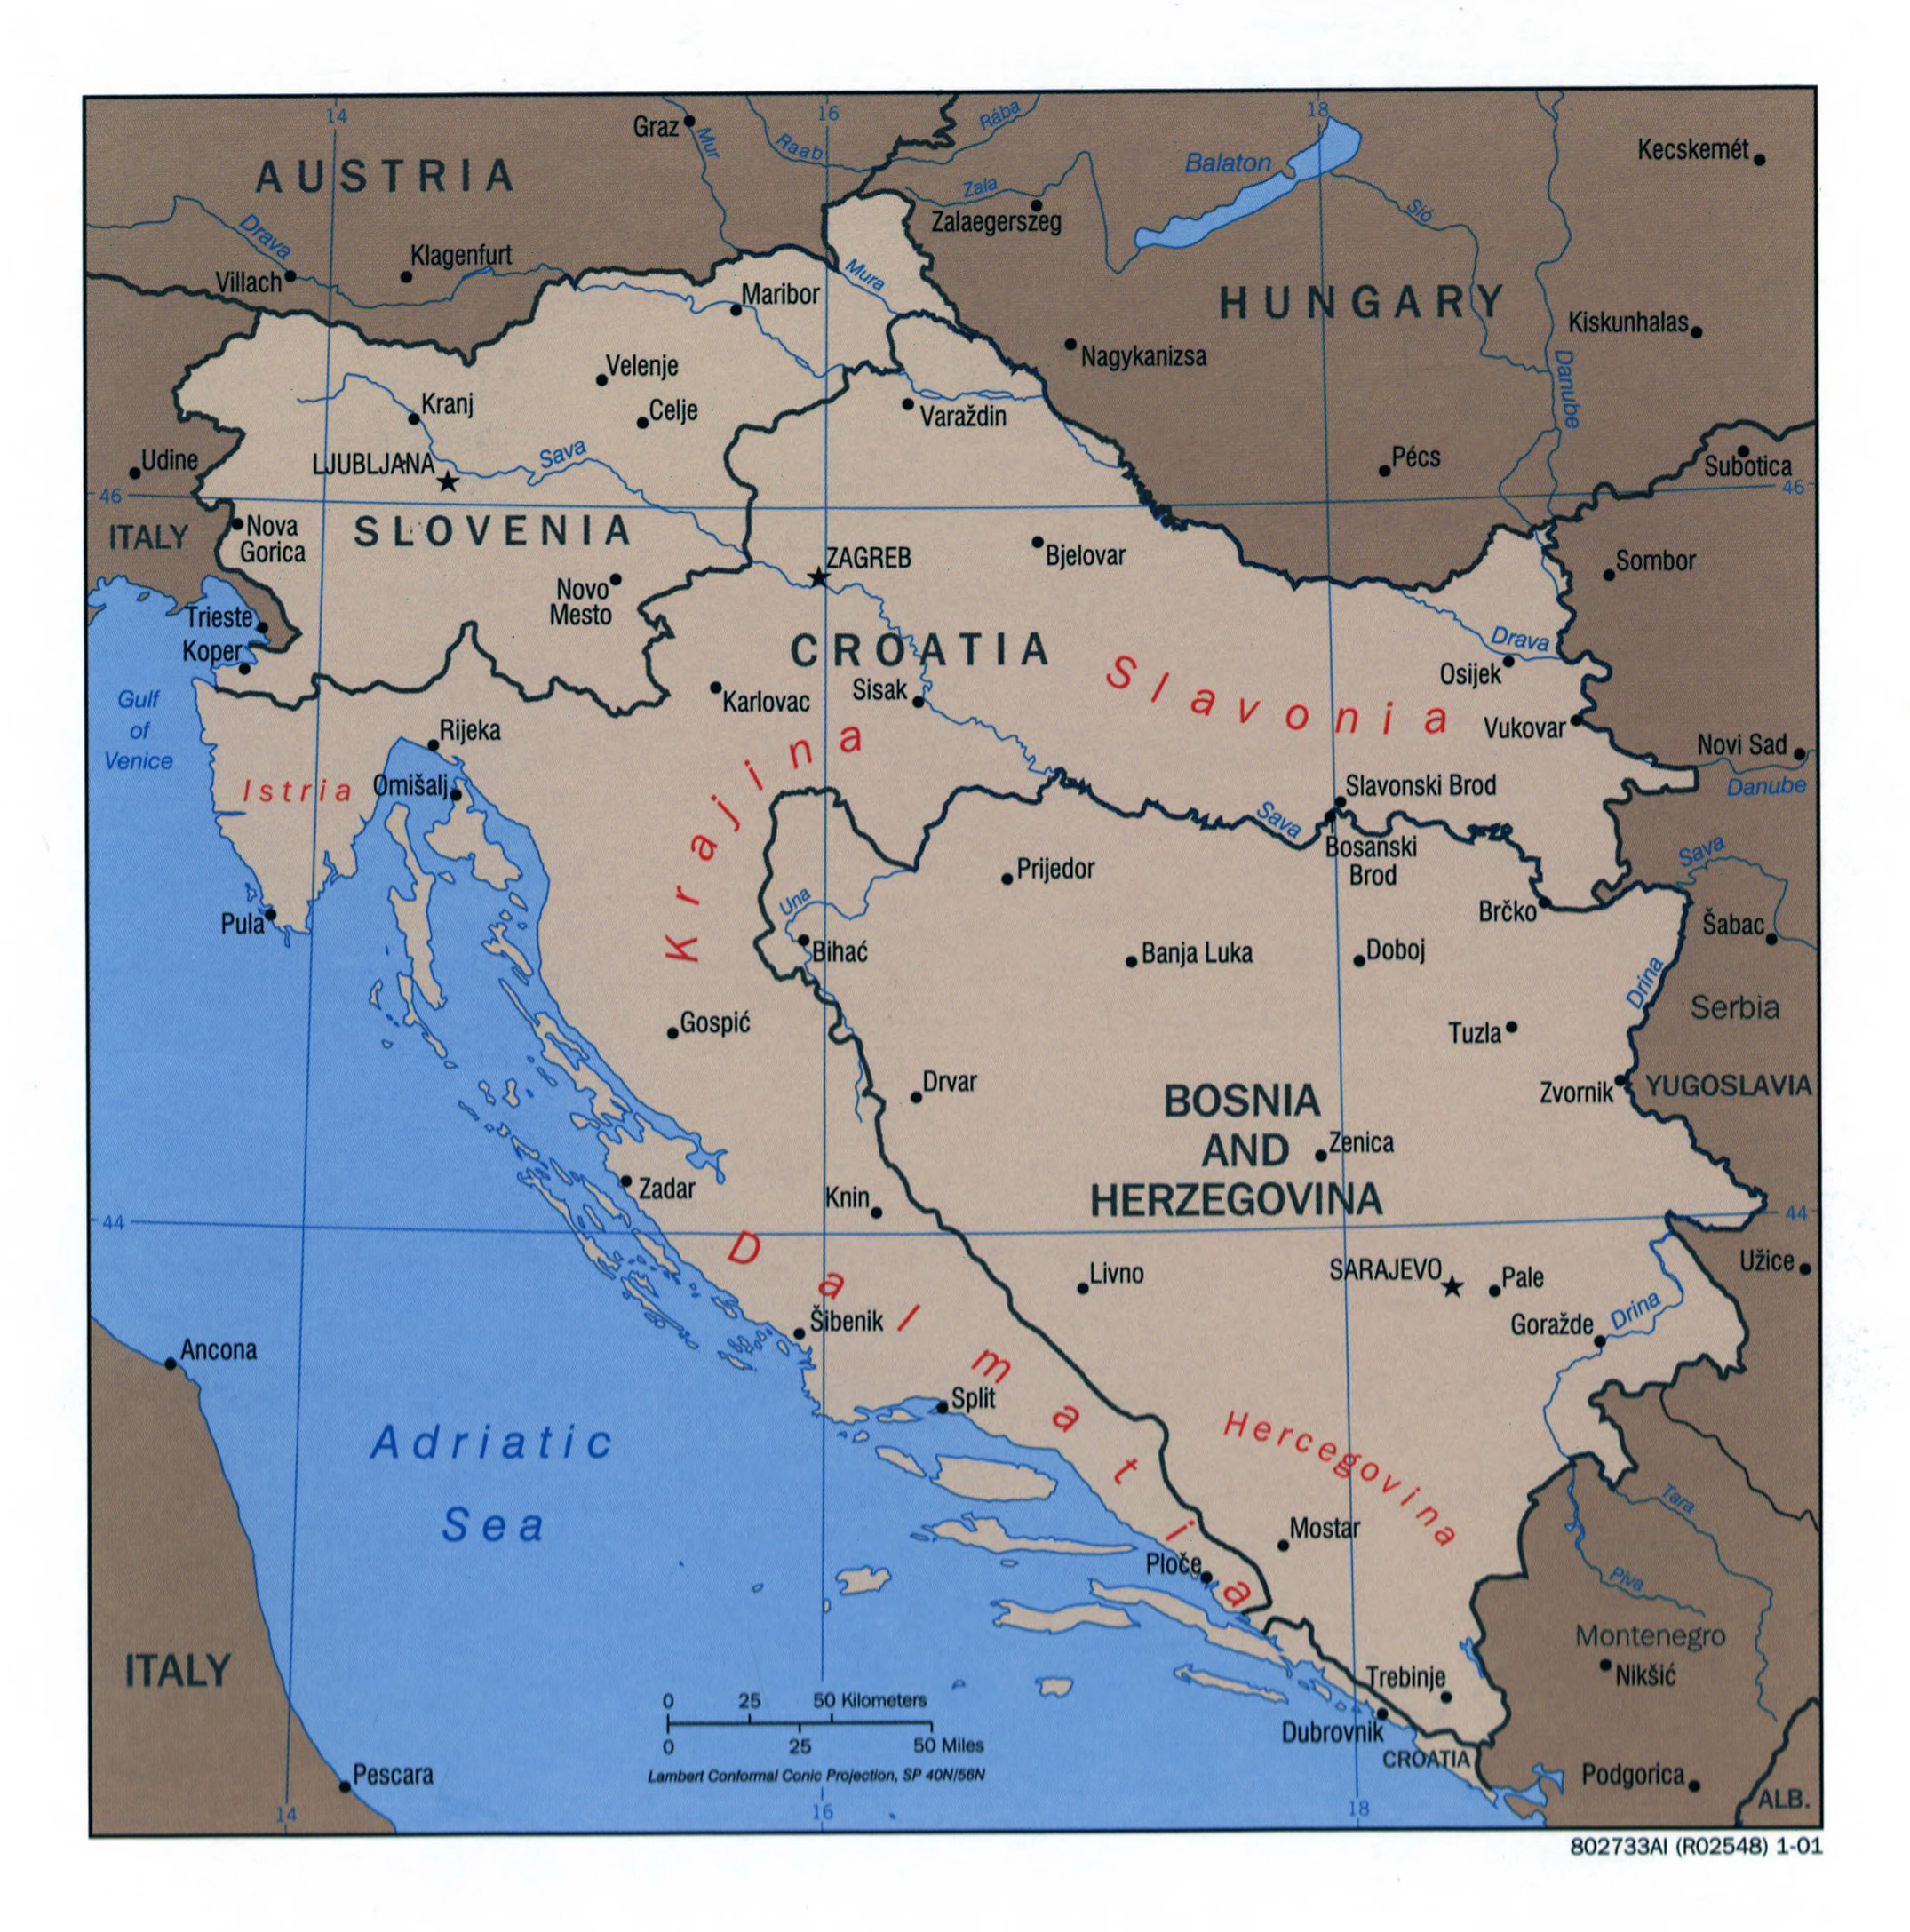 Large scale political map of the Western Former Yugoslav Republics ...